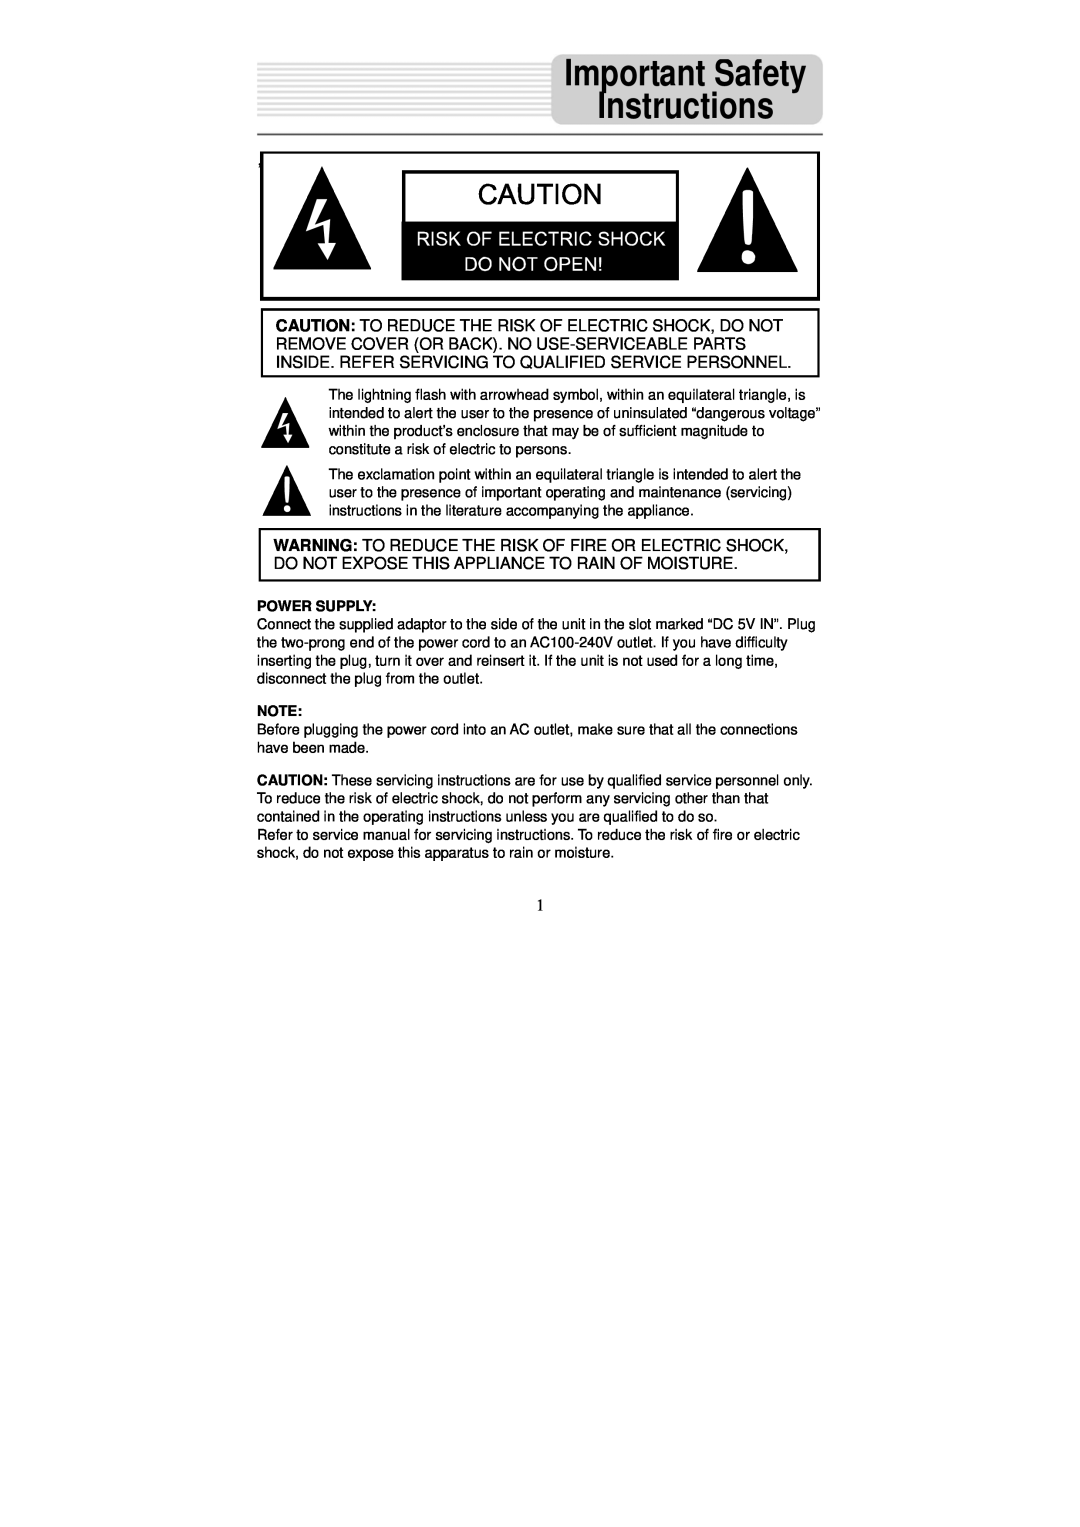 Nextar X3-09 operating instructions Important Safety Instructions, Power Supply 